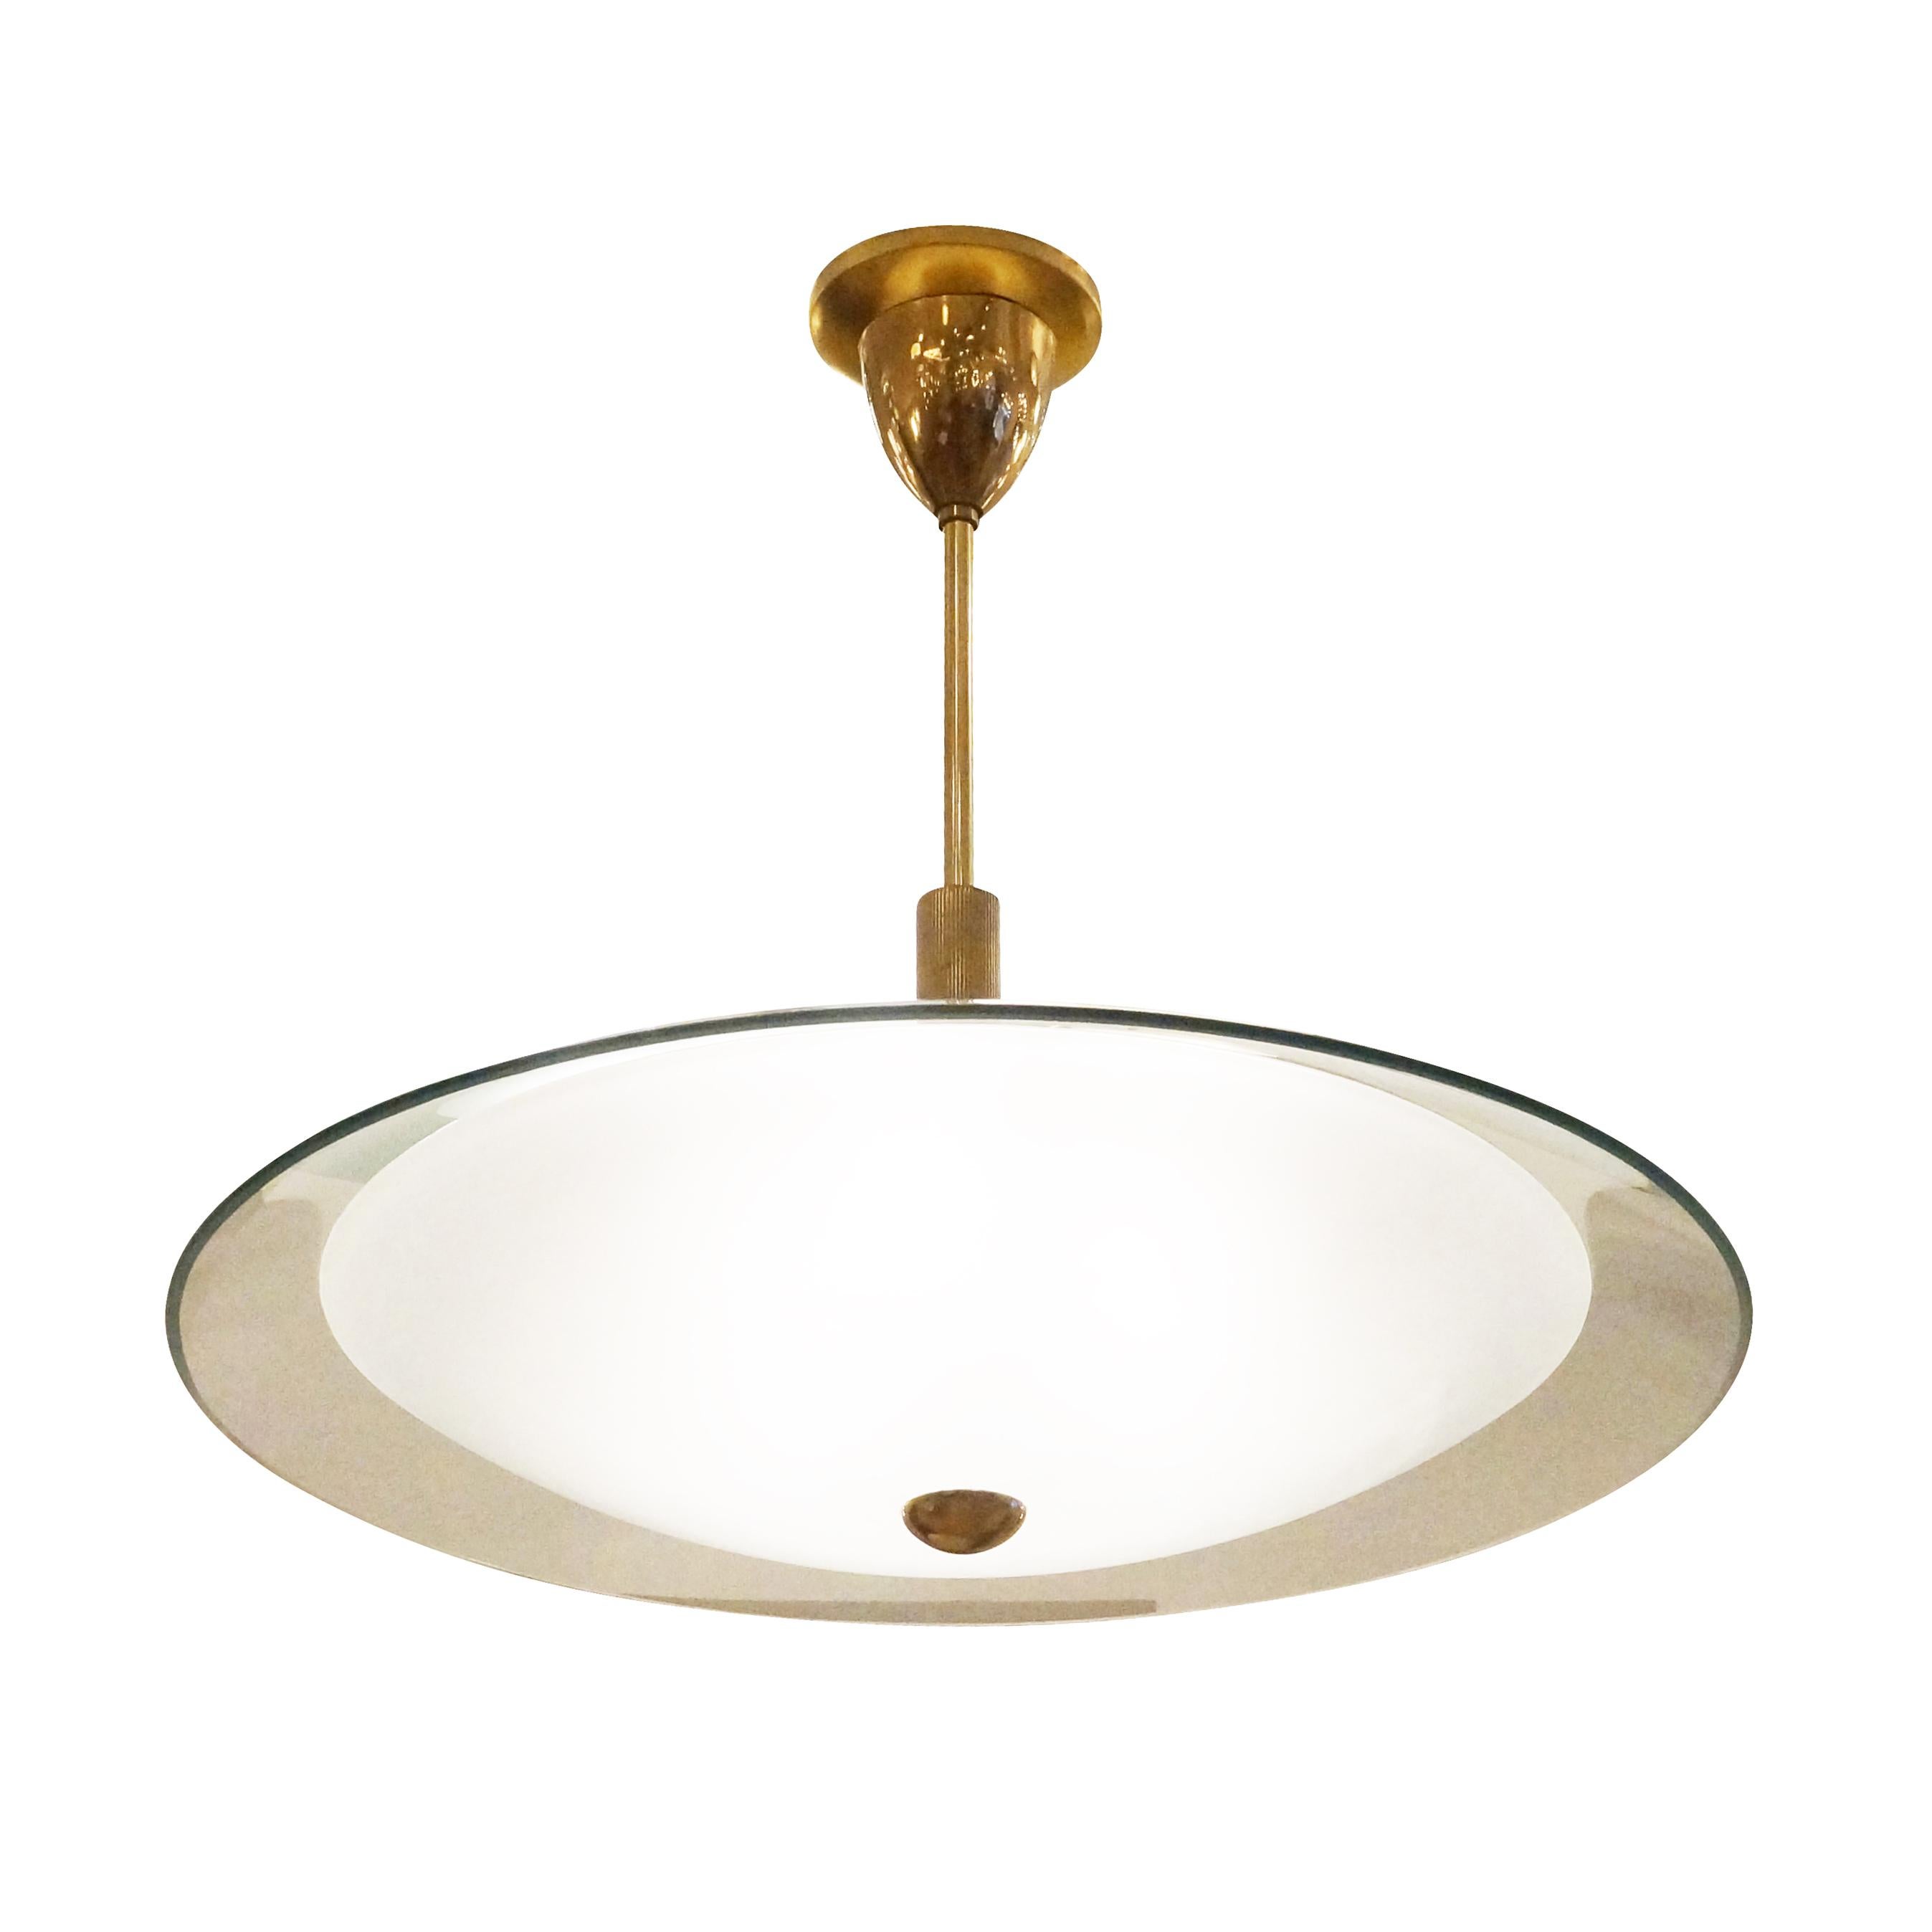 1960’s Fontana Arte style chandelier with a clear glass upper diffuser and smaller frosted glass lower diffuser. Brass hardware-holds three light sources. 

Condition: Excellent vintage condition, minor wear consistent with age and use.

Diameter: